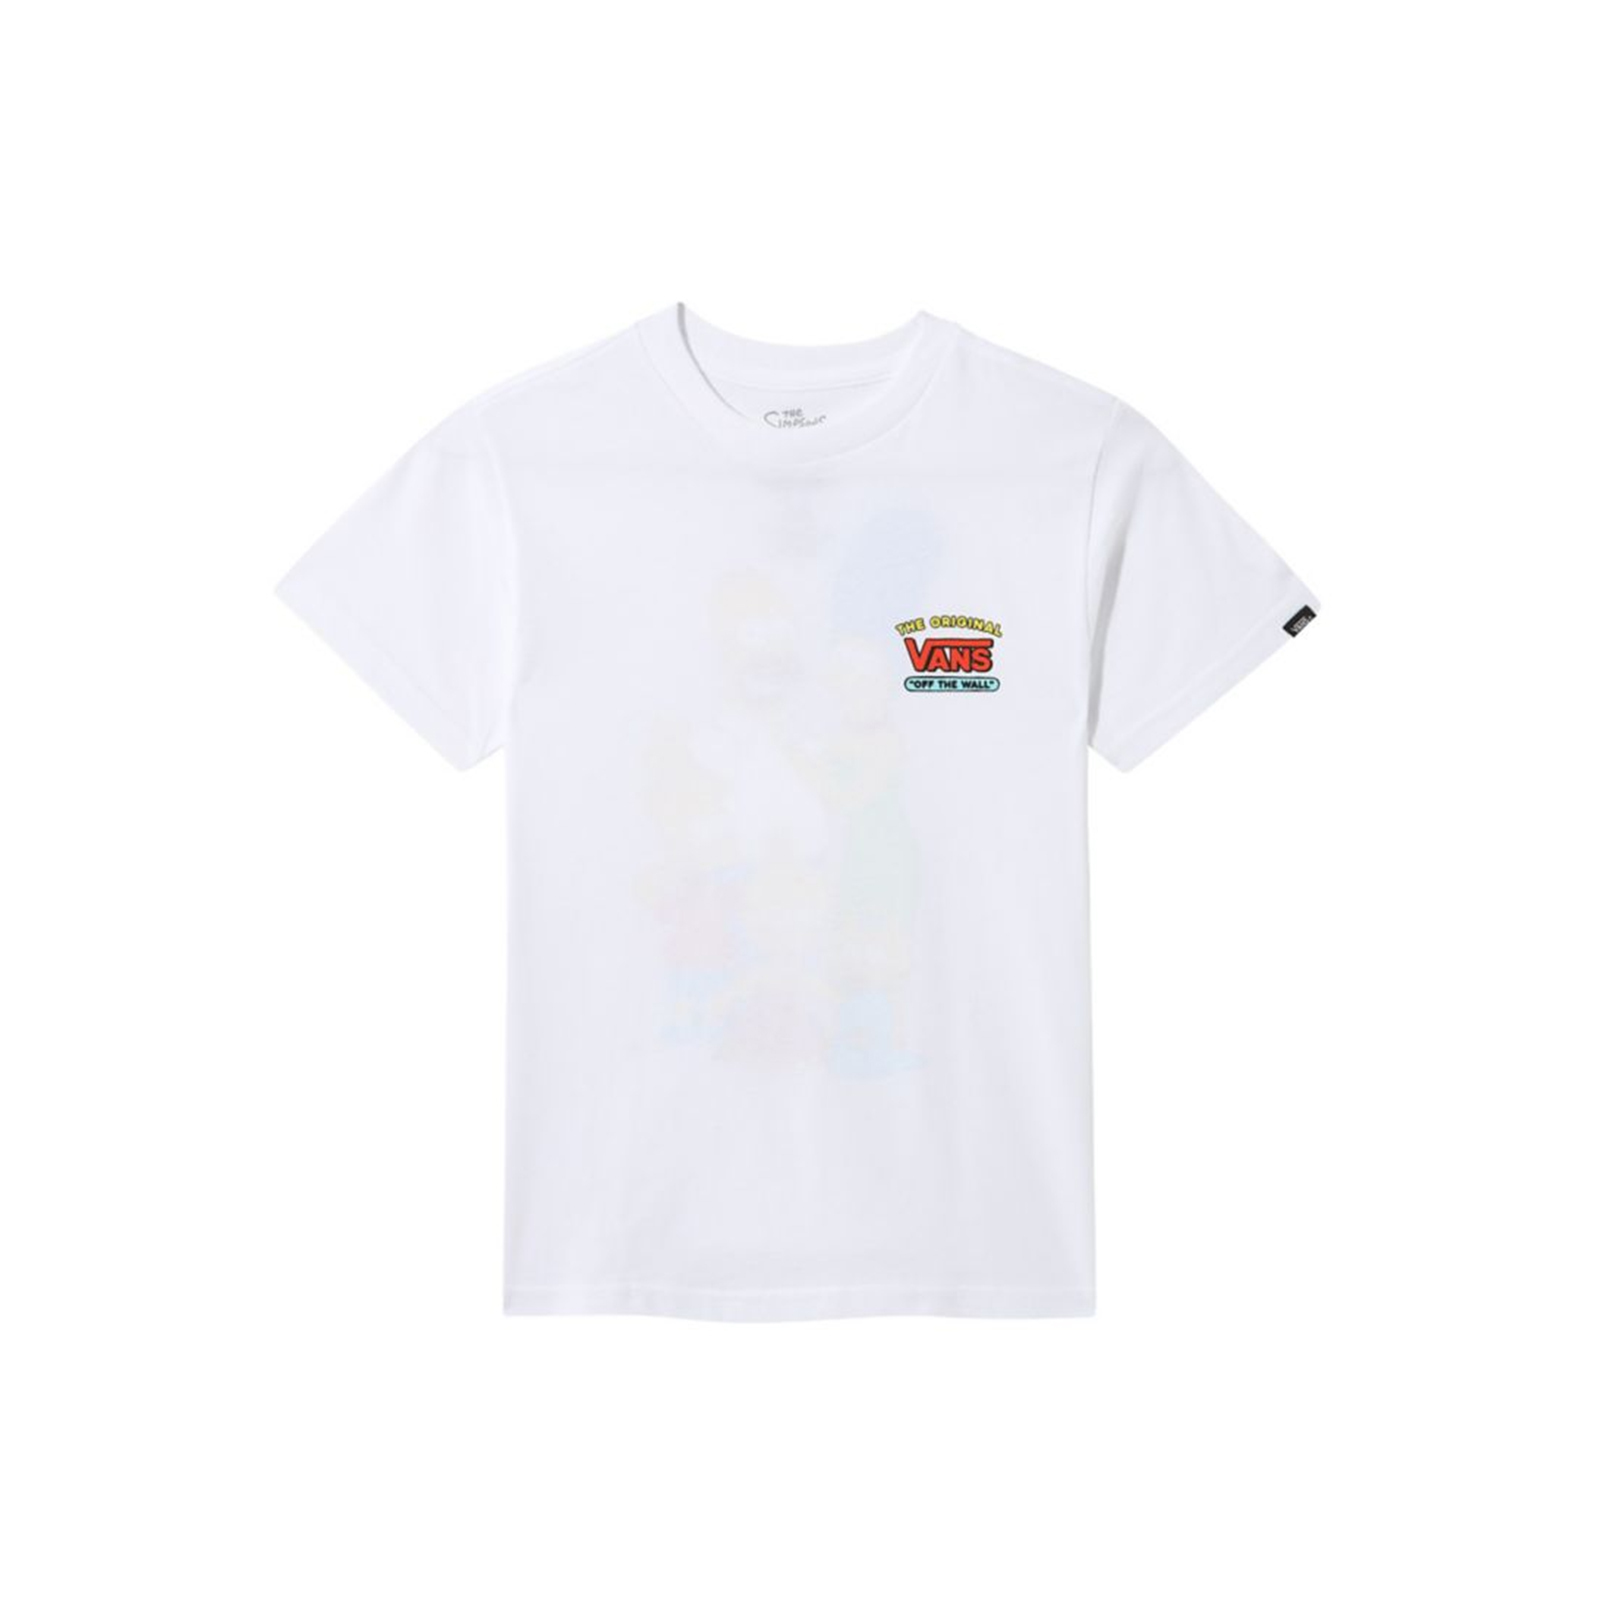 T-shirts Vans x The Simpsons Family Tee White